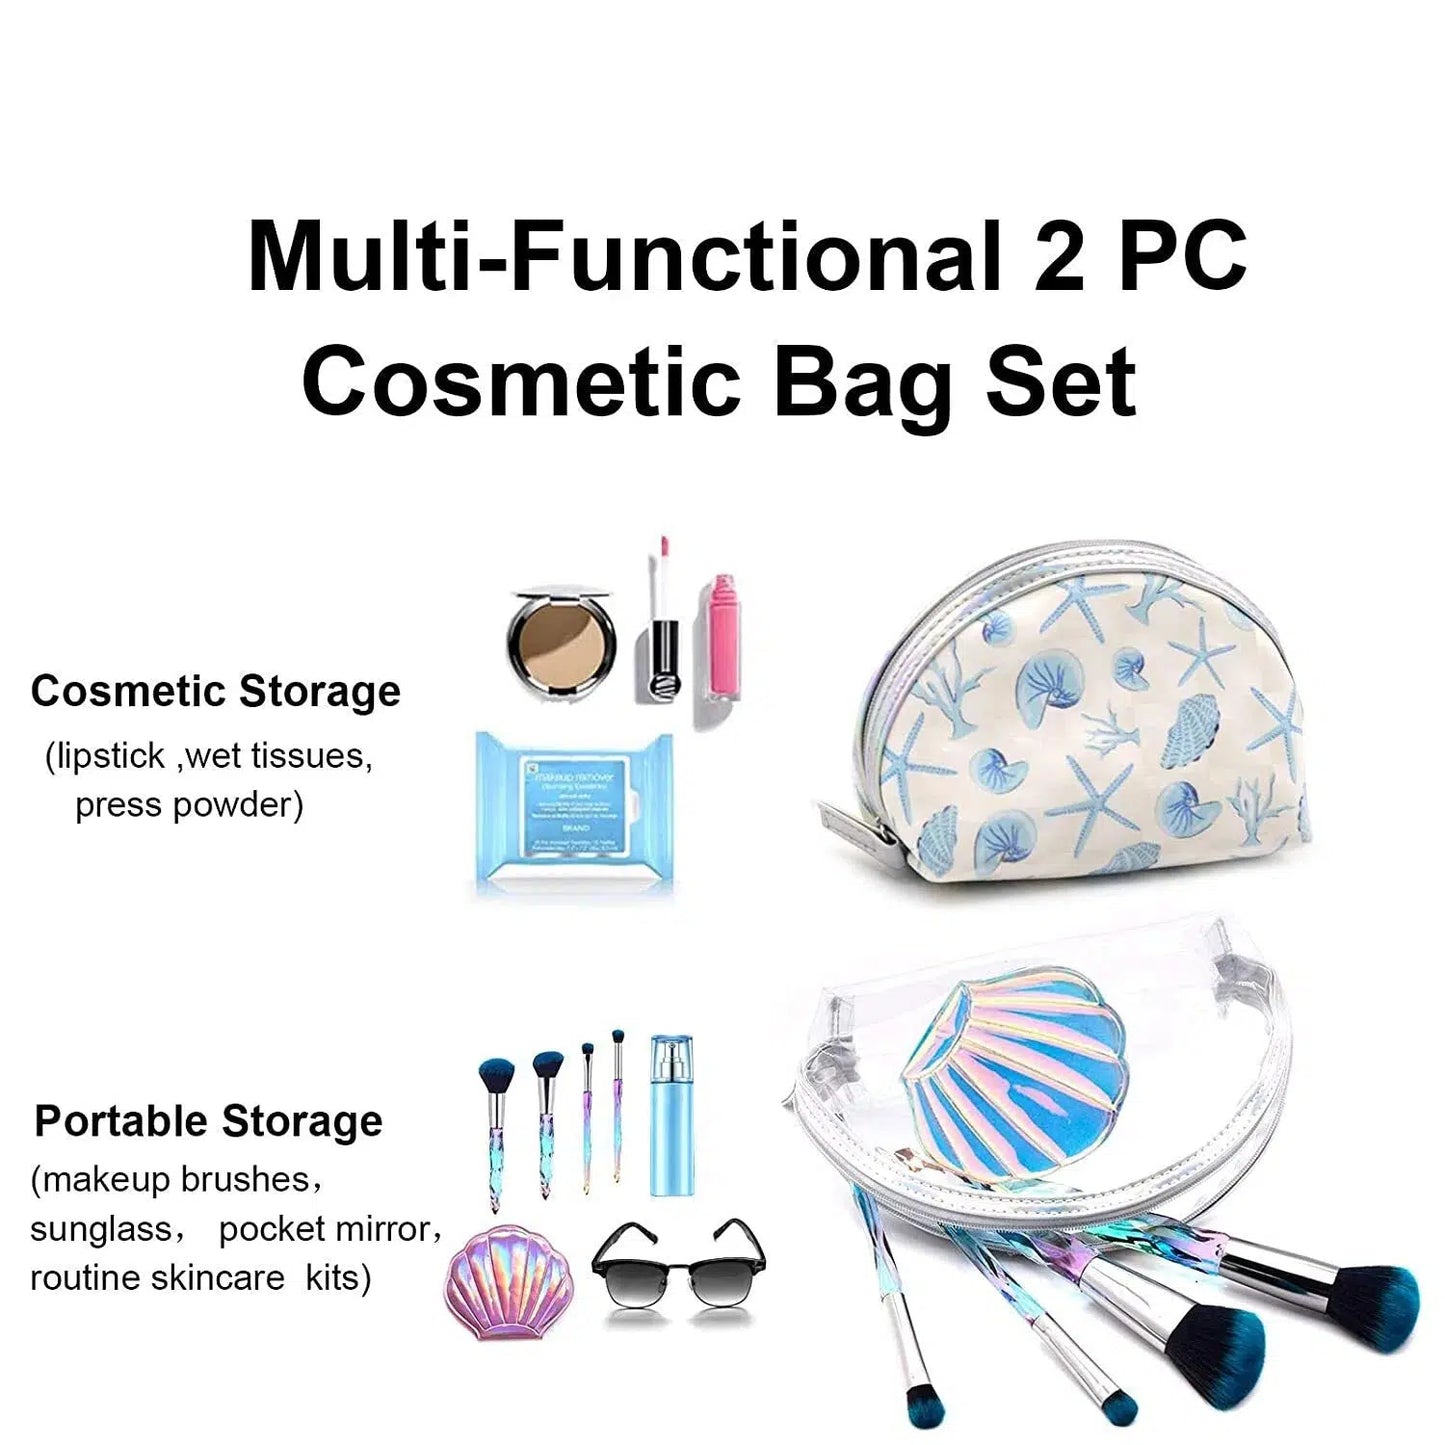 Hap Tim Small Cosmetic Bag for Purse, Cute Clear Bridesmaid Makeup Pouch Set, Portable & Waterproof Mini Cosmetic Bags for Teens Little Girls Holding Makeup Brushes Lipsticks Glasses Accessories, Set of 2, Blue